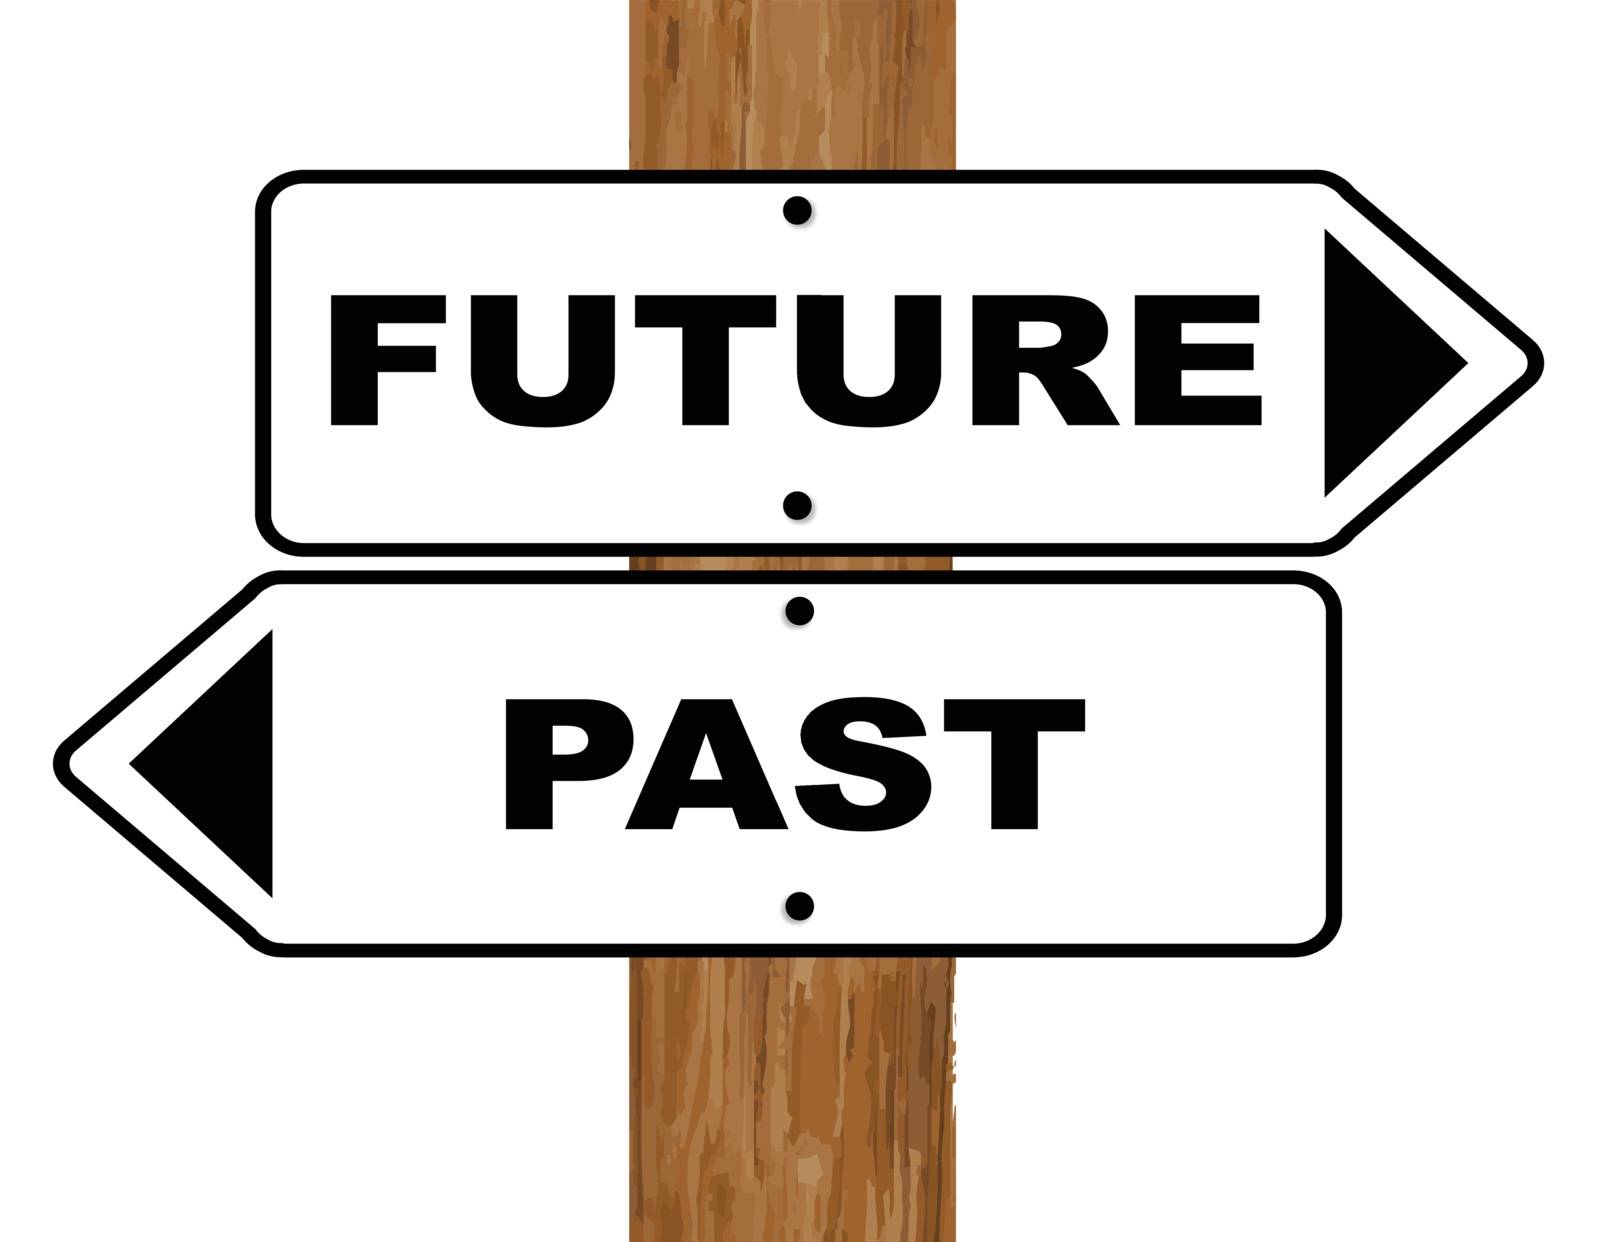 Future and Past signs fixed to a wooden pole over a white background